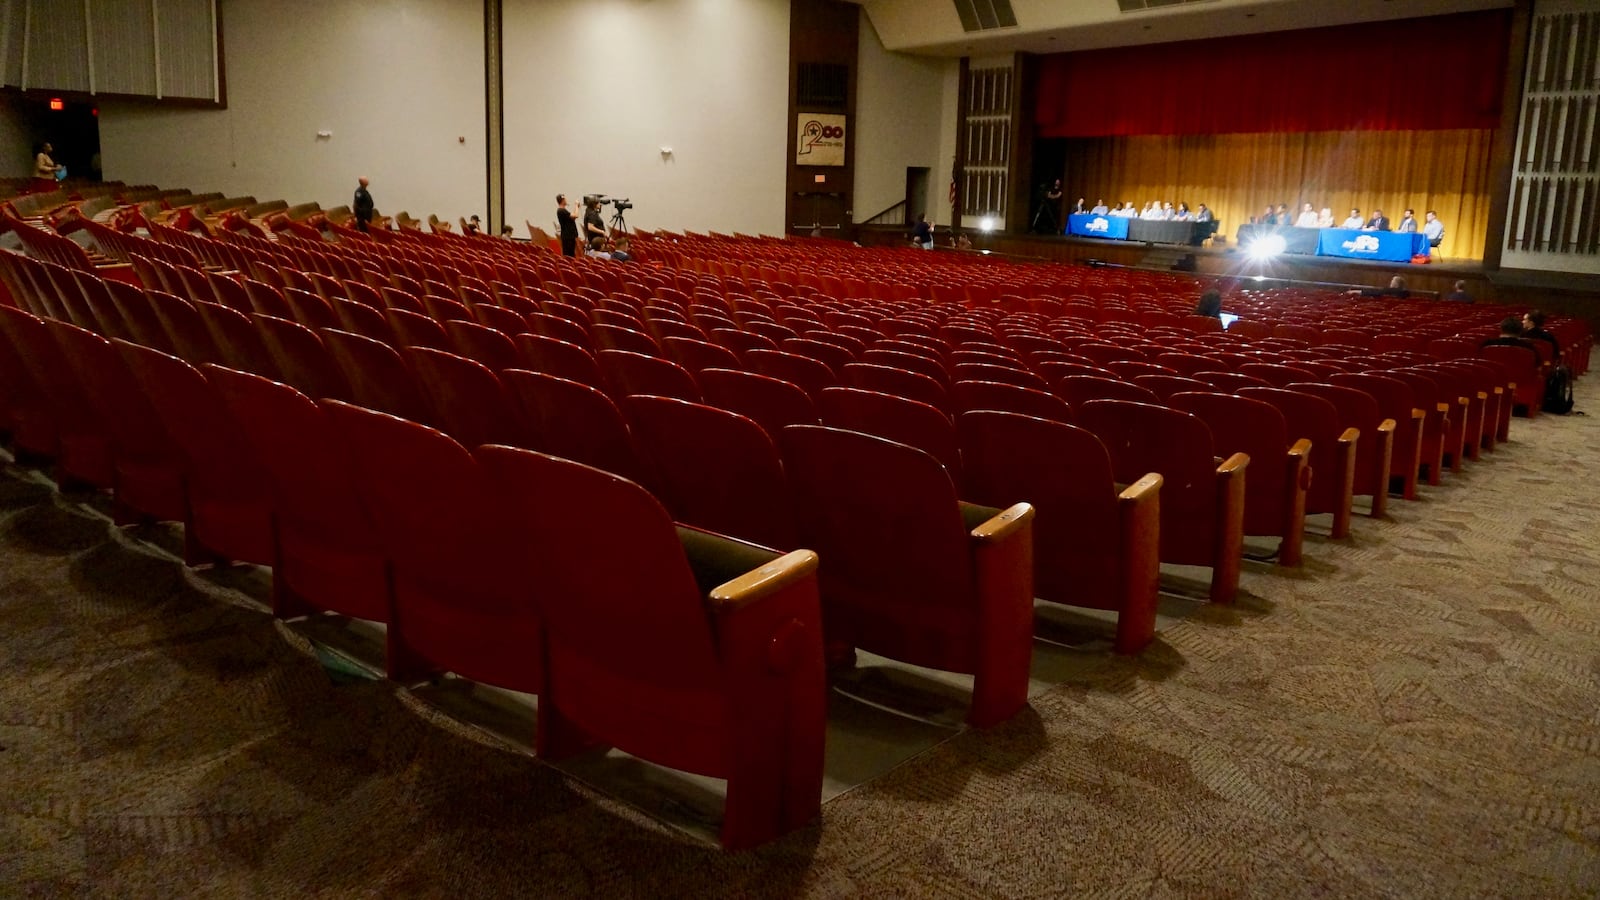 Fewer than 20 people filled the seats of the John Marshall auditorium Thursday.